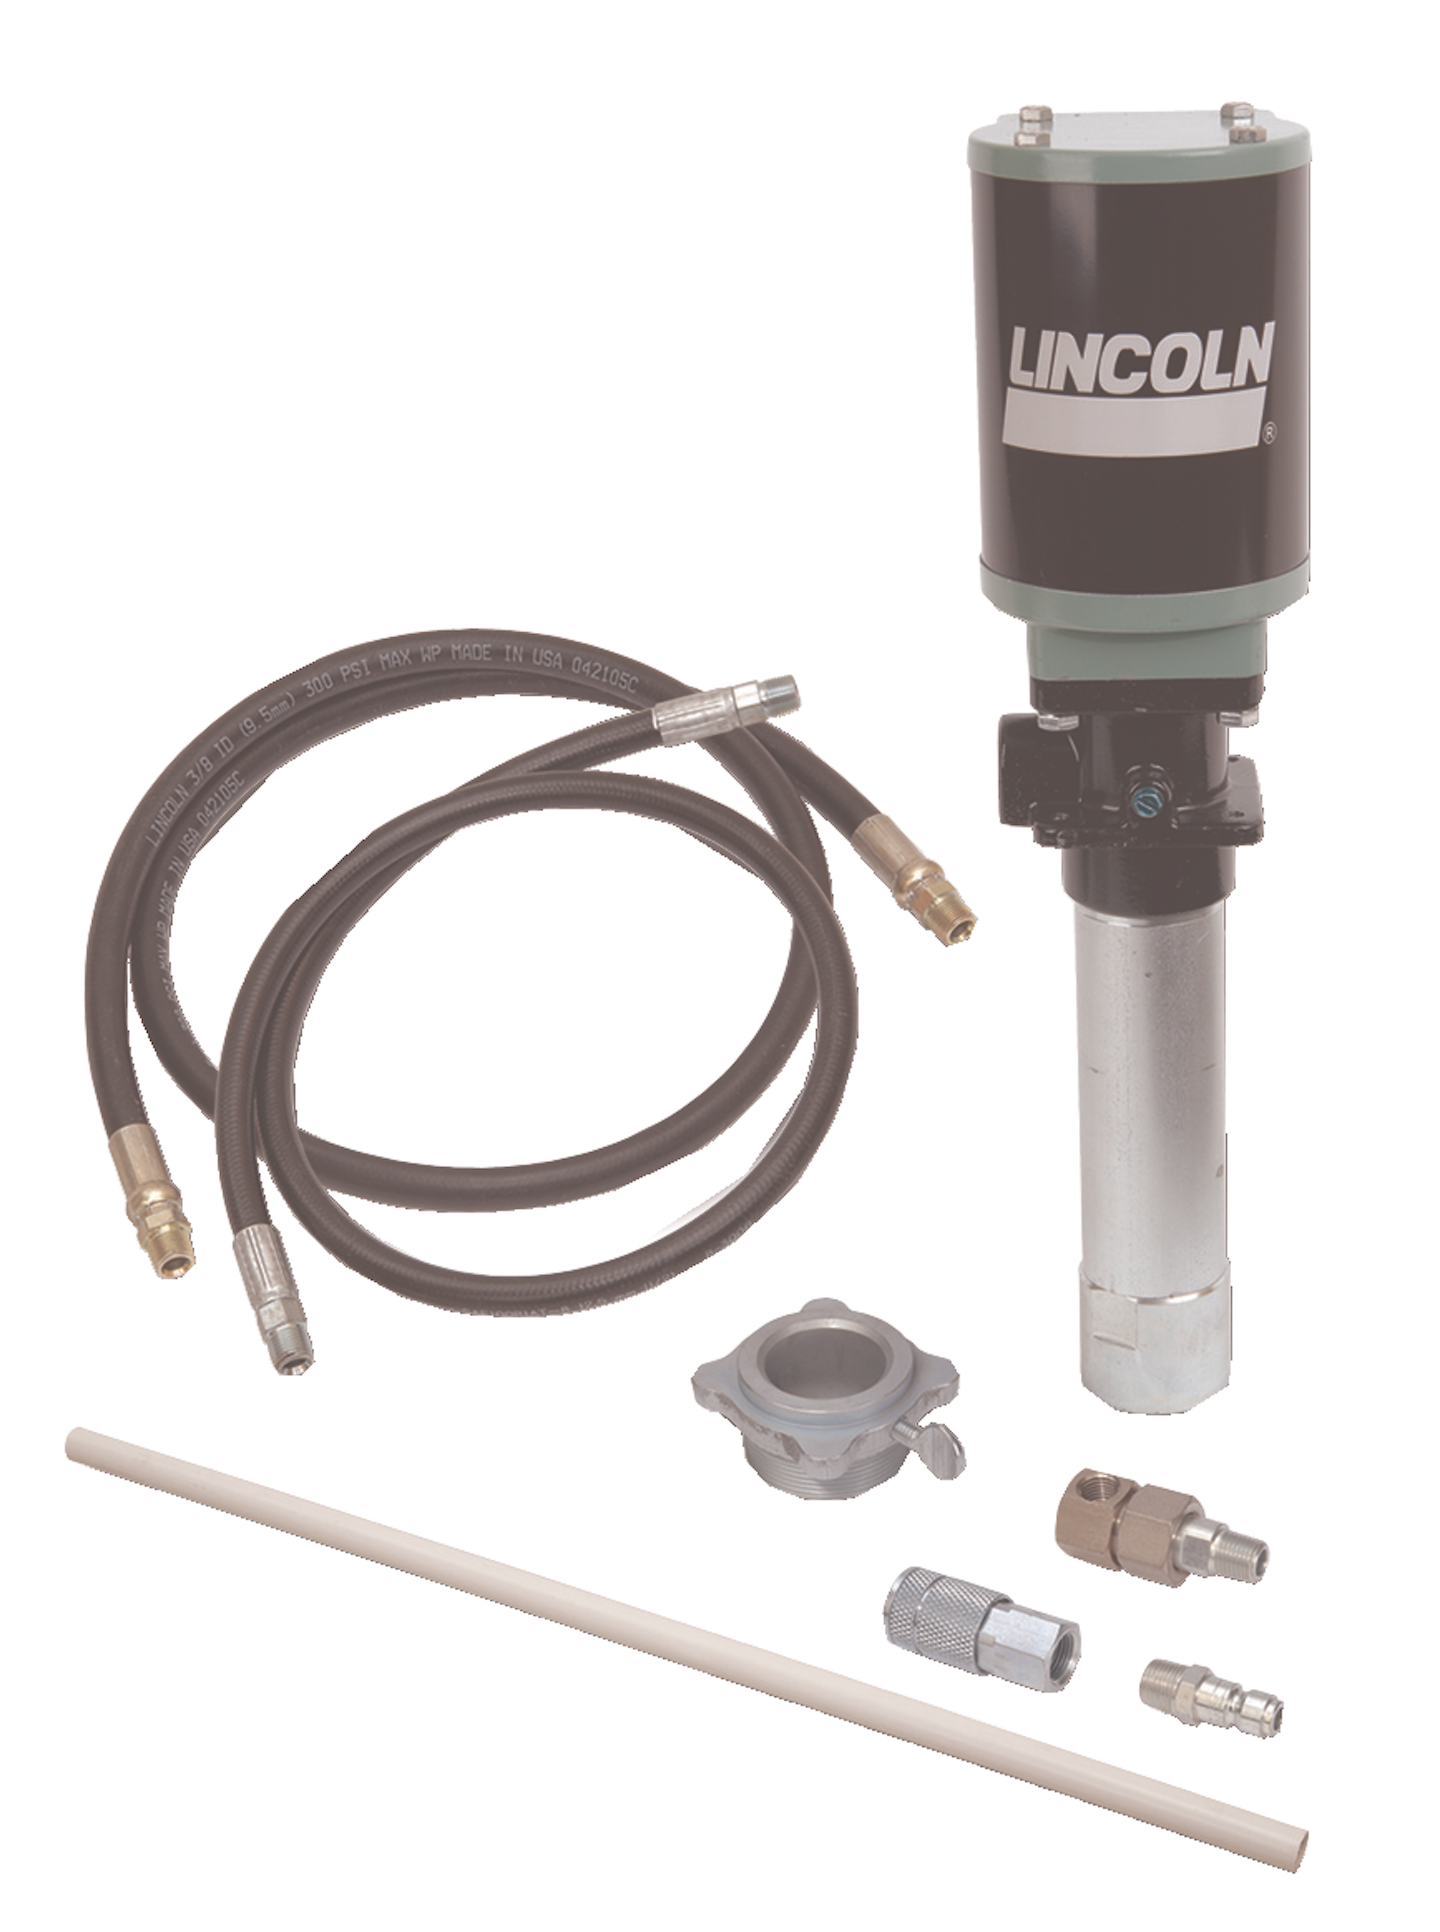 Pmv Lubrication Pumps From Lincoln Lubrication Systems Vehicle